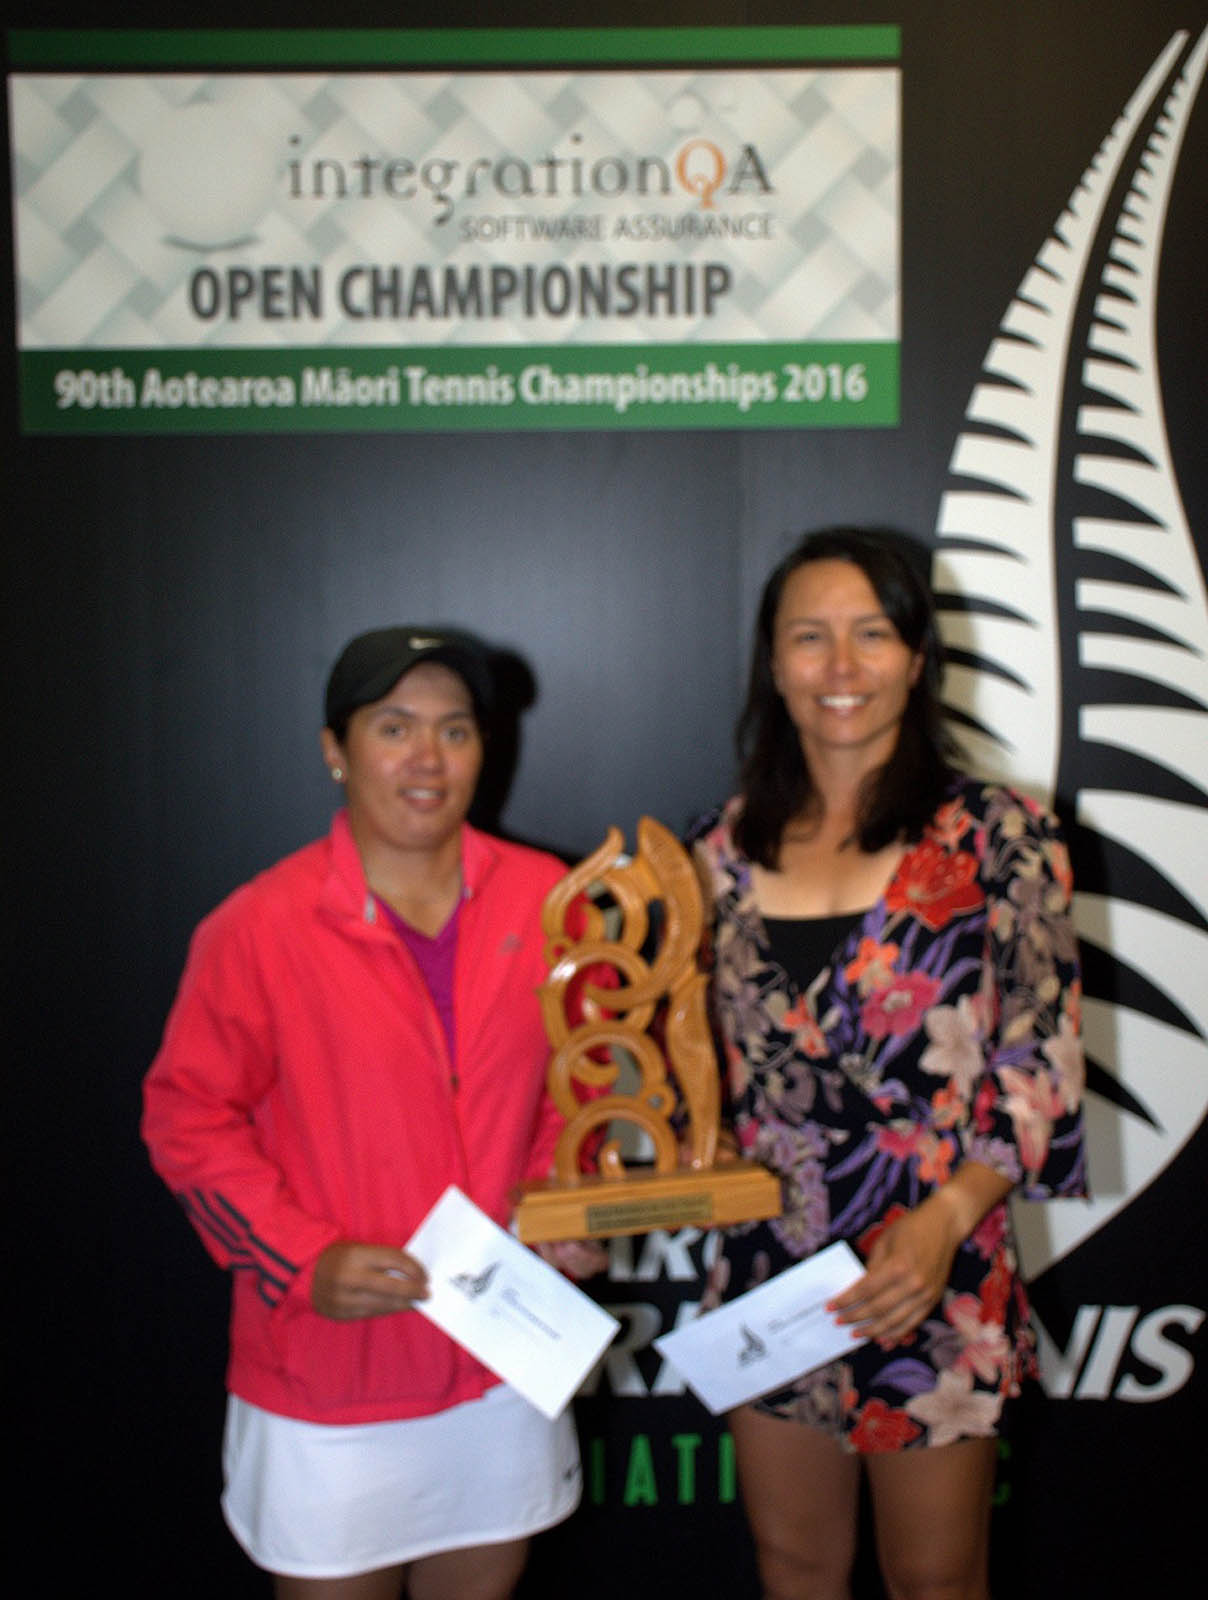 Open Womens Doubles Winners: Luci Barlow and Tracey O'Connor